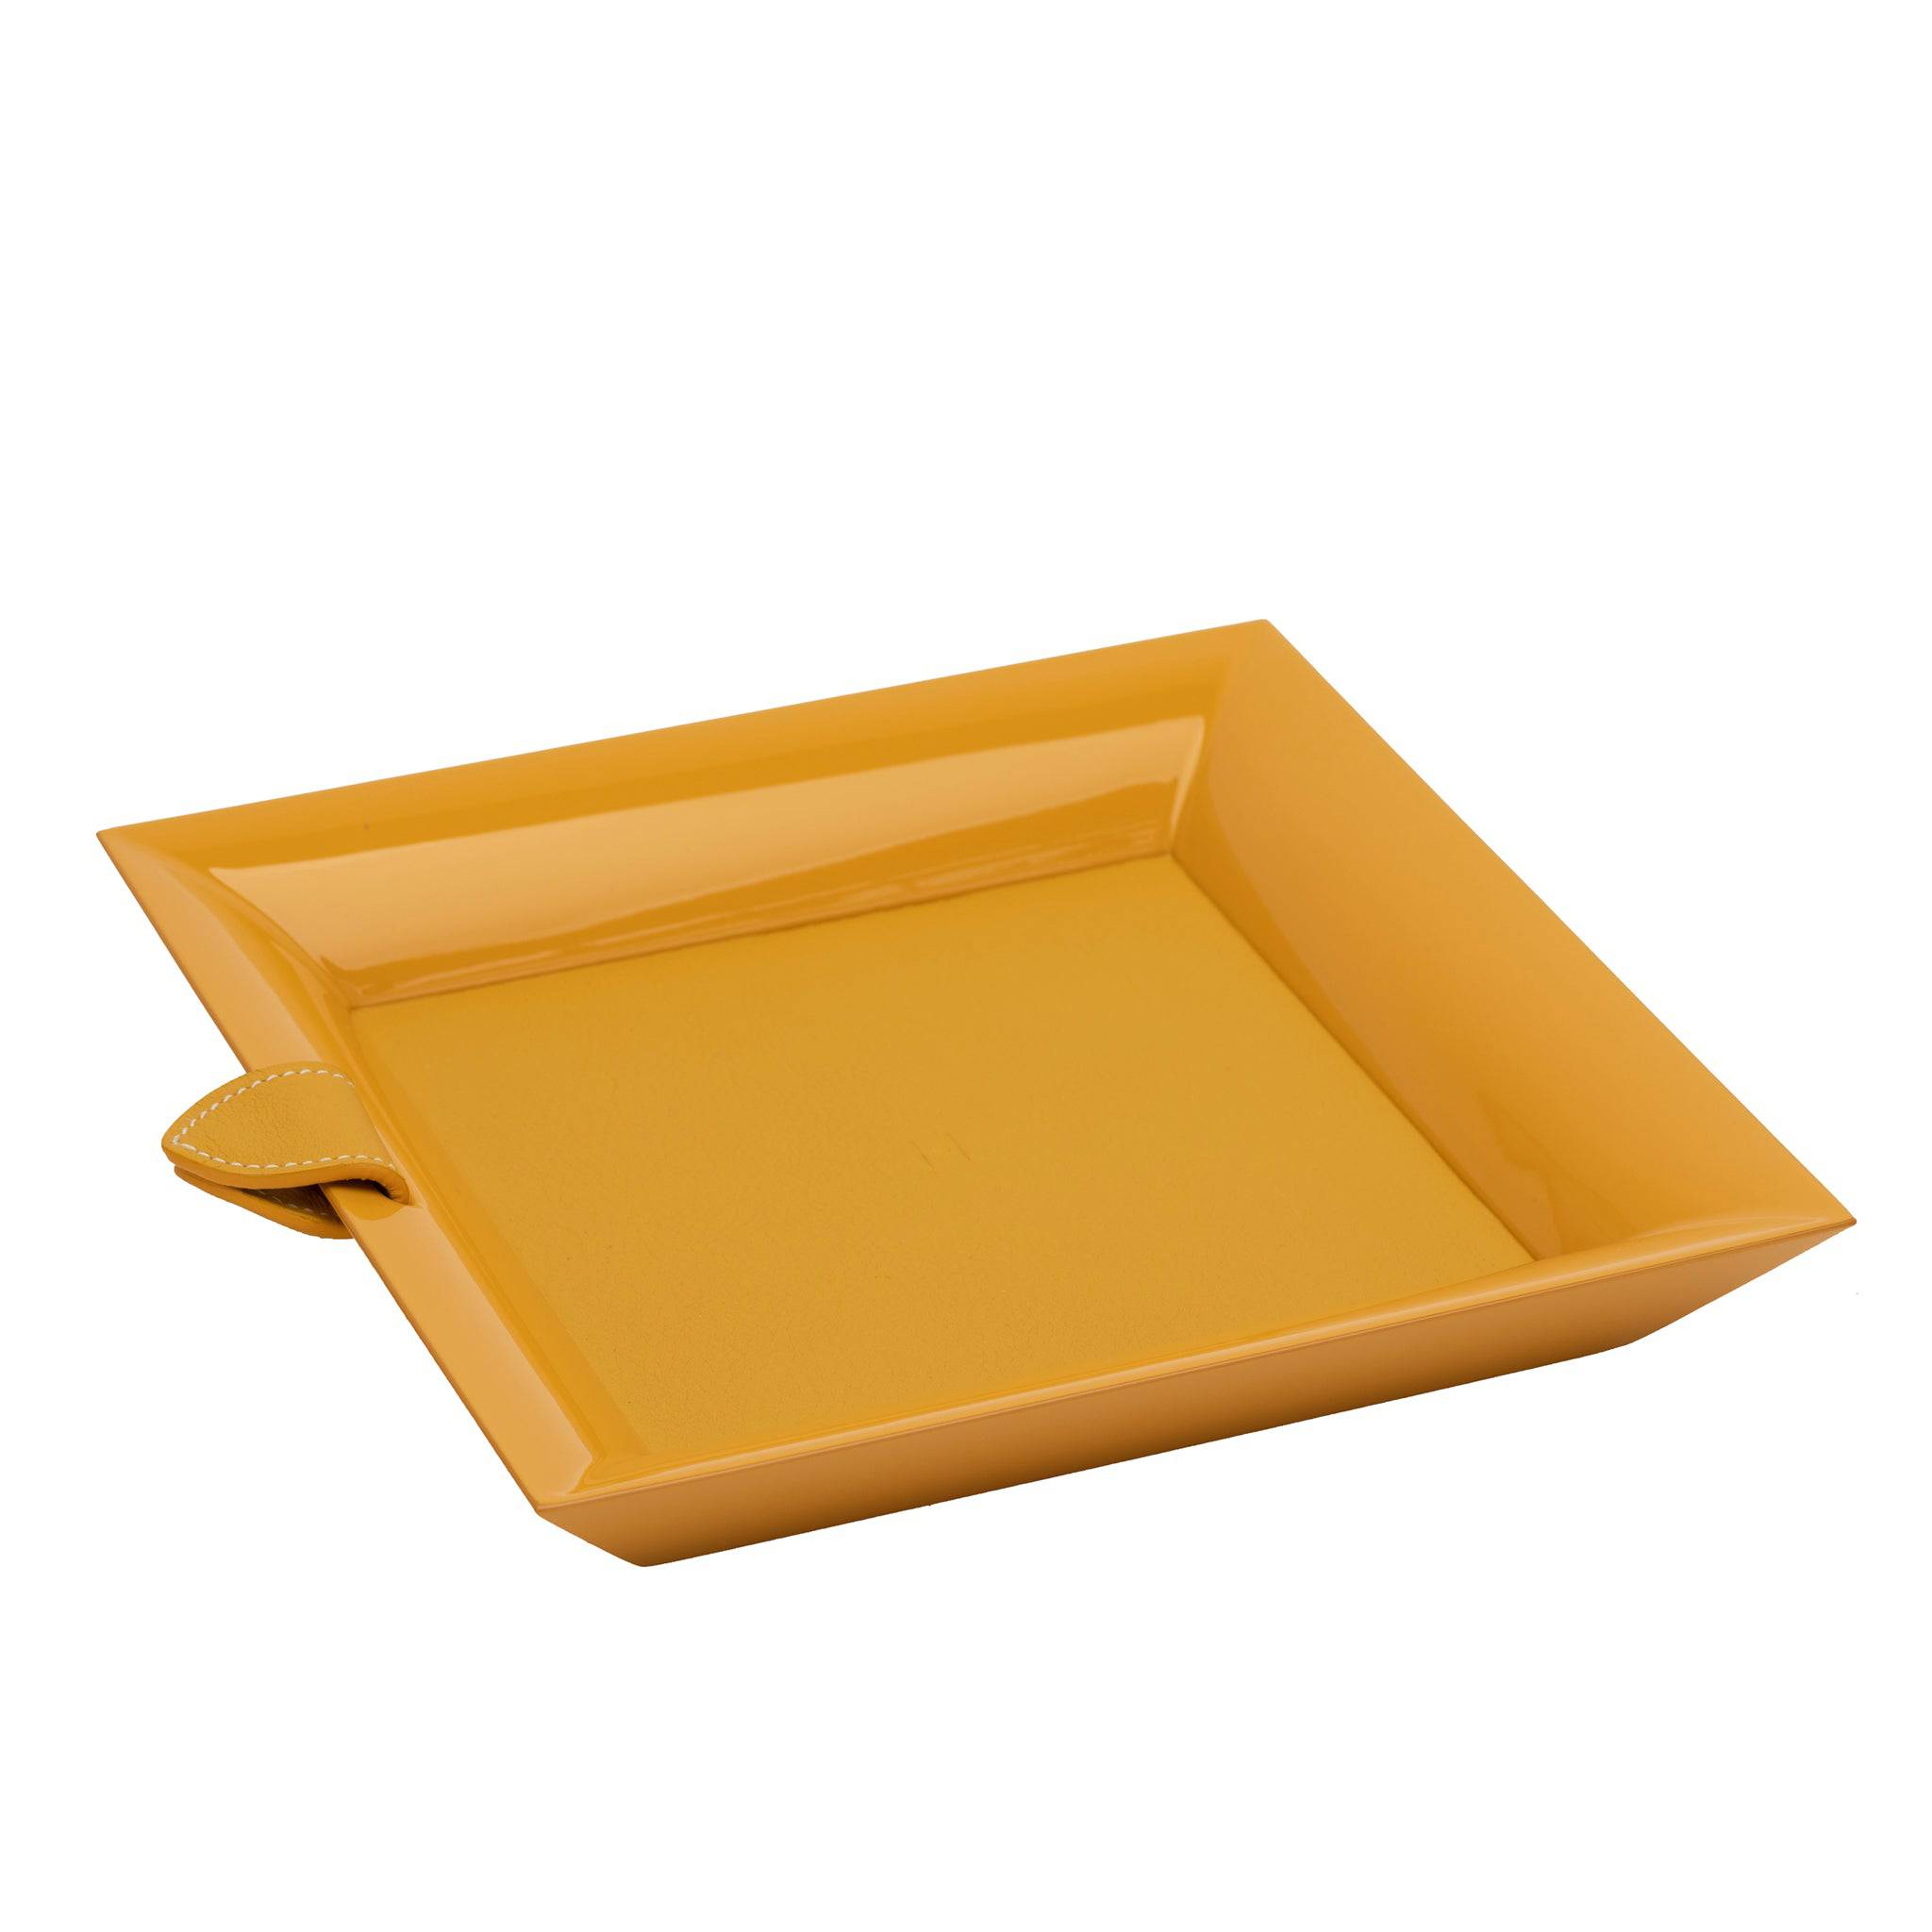 HERMES ATRIUM CHANGE TRAY LACQUERED WOOD CURRY - On Repeat